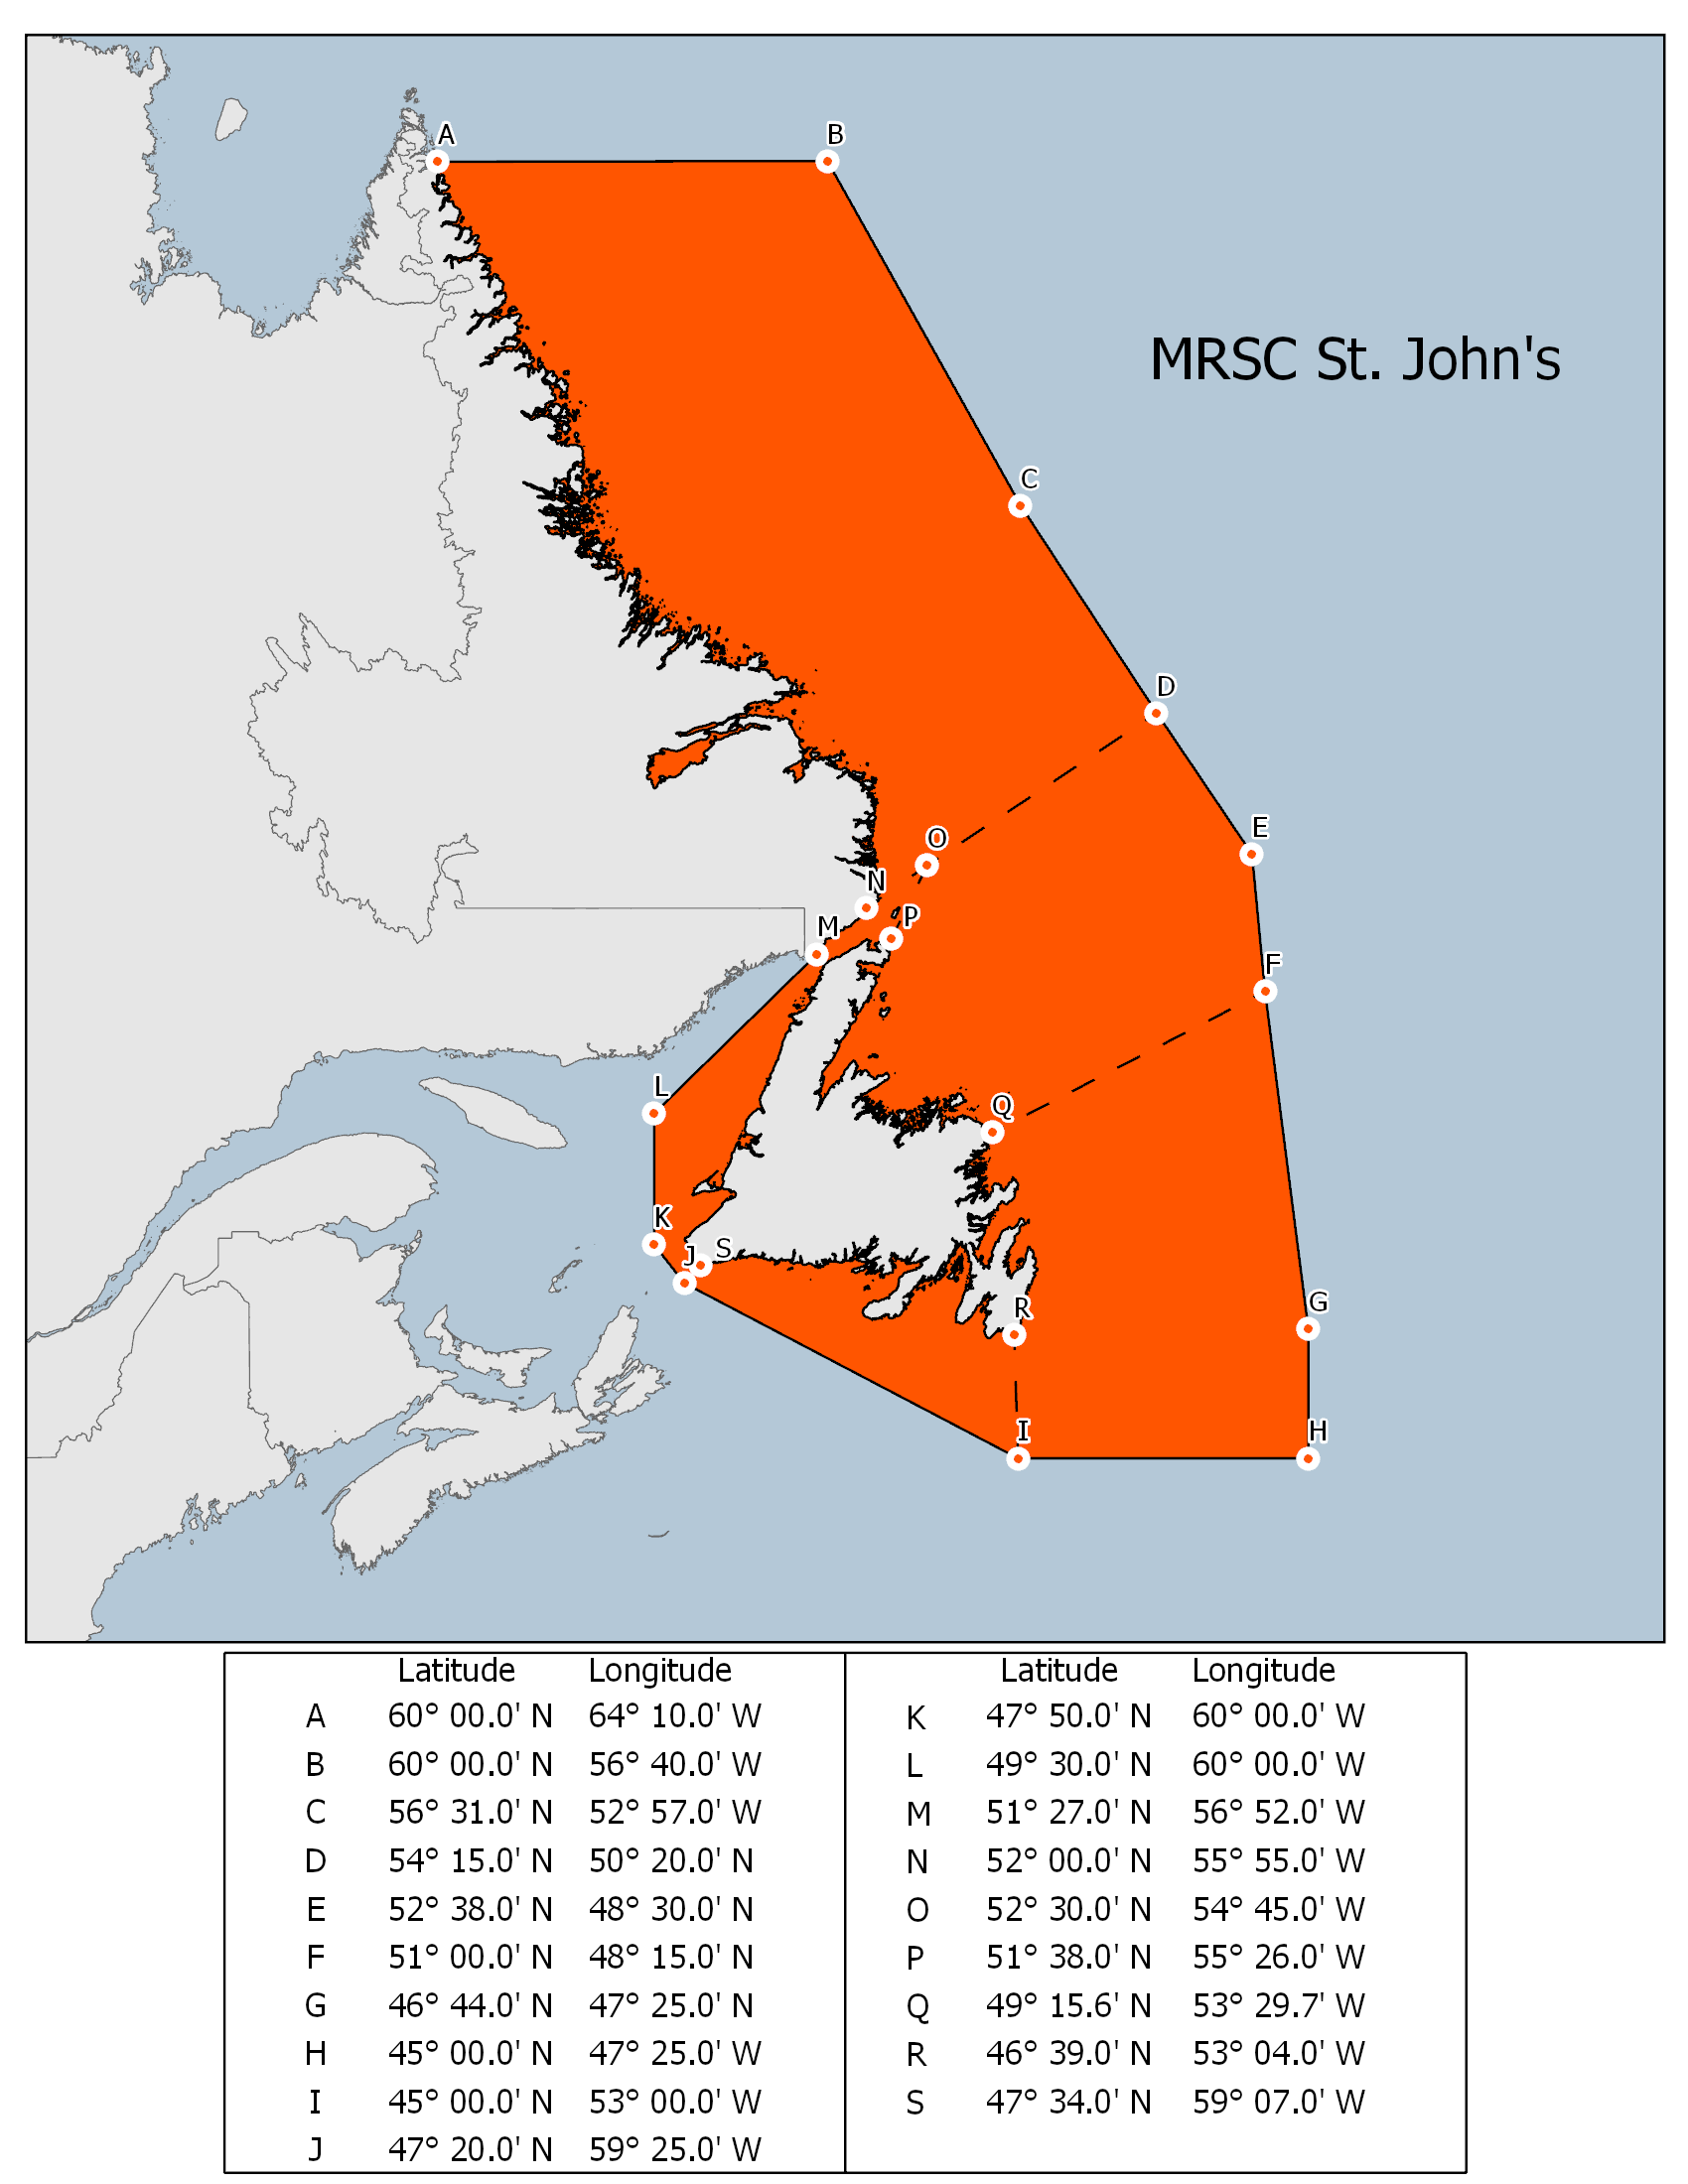 Map outlining MRSC St. John's search and rescue sub-region